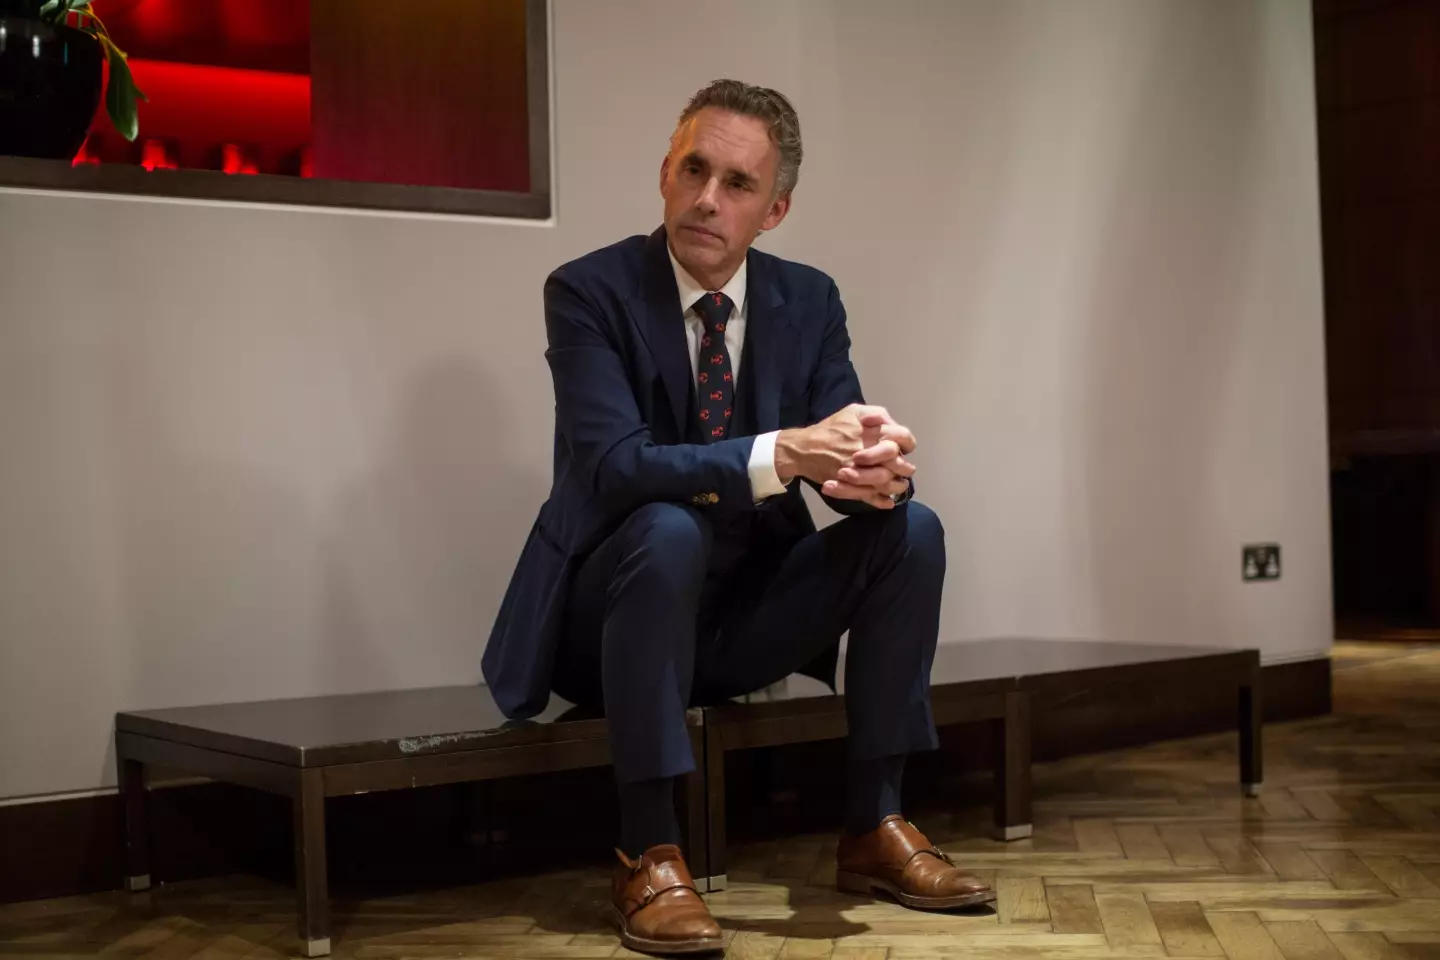 Psychologist Jordan Peterson, the world's most controversial intellectual, debated with atheist Sam Harris front of 6000 spectators at London 02 Arena.